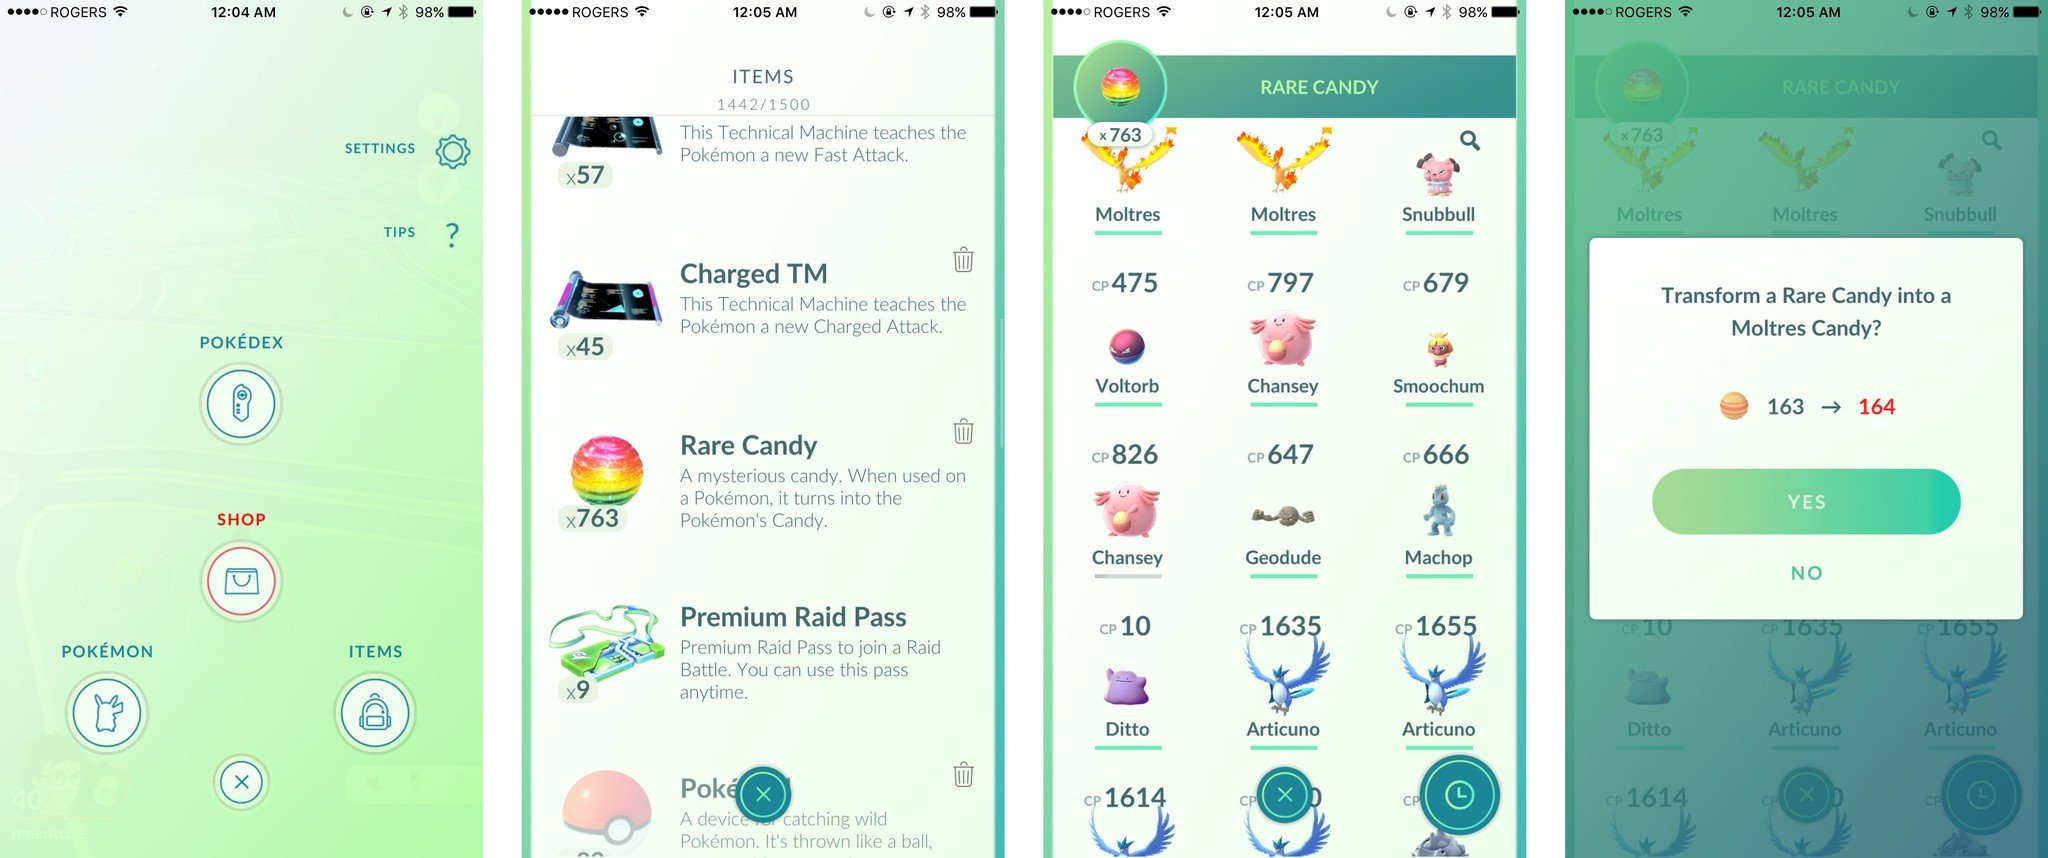 How to get more Candy and Rare Candy in Pokémon Go | iMore